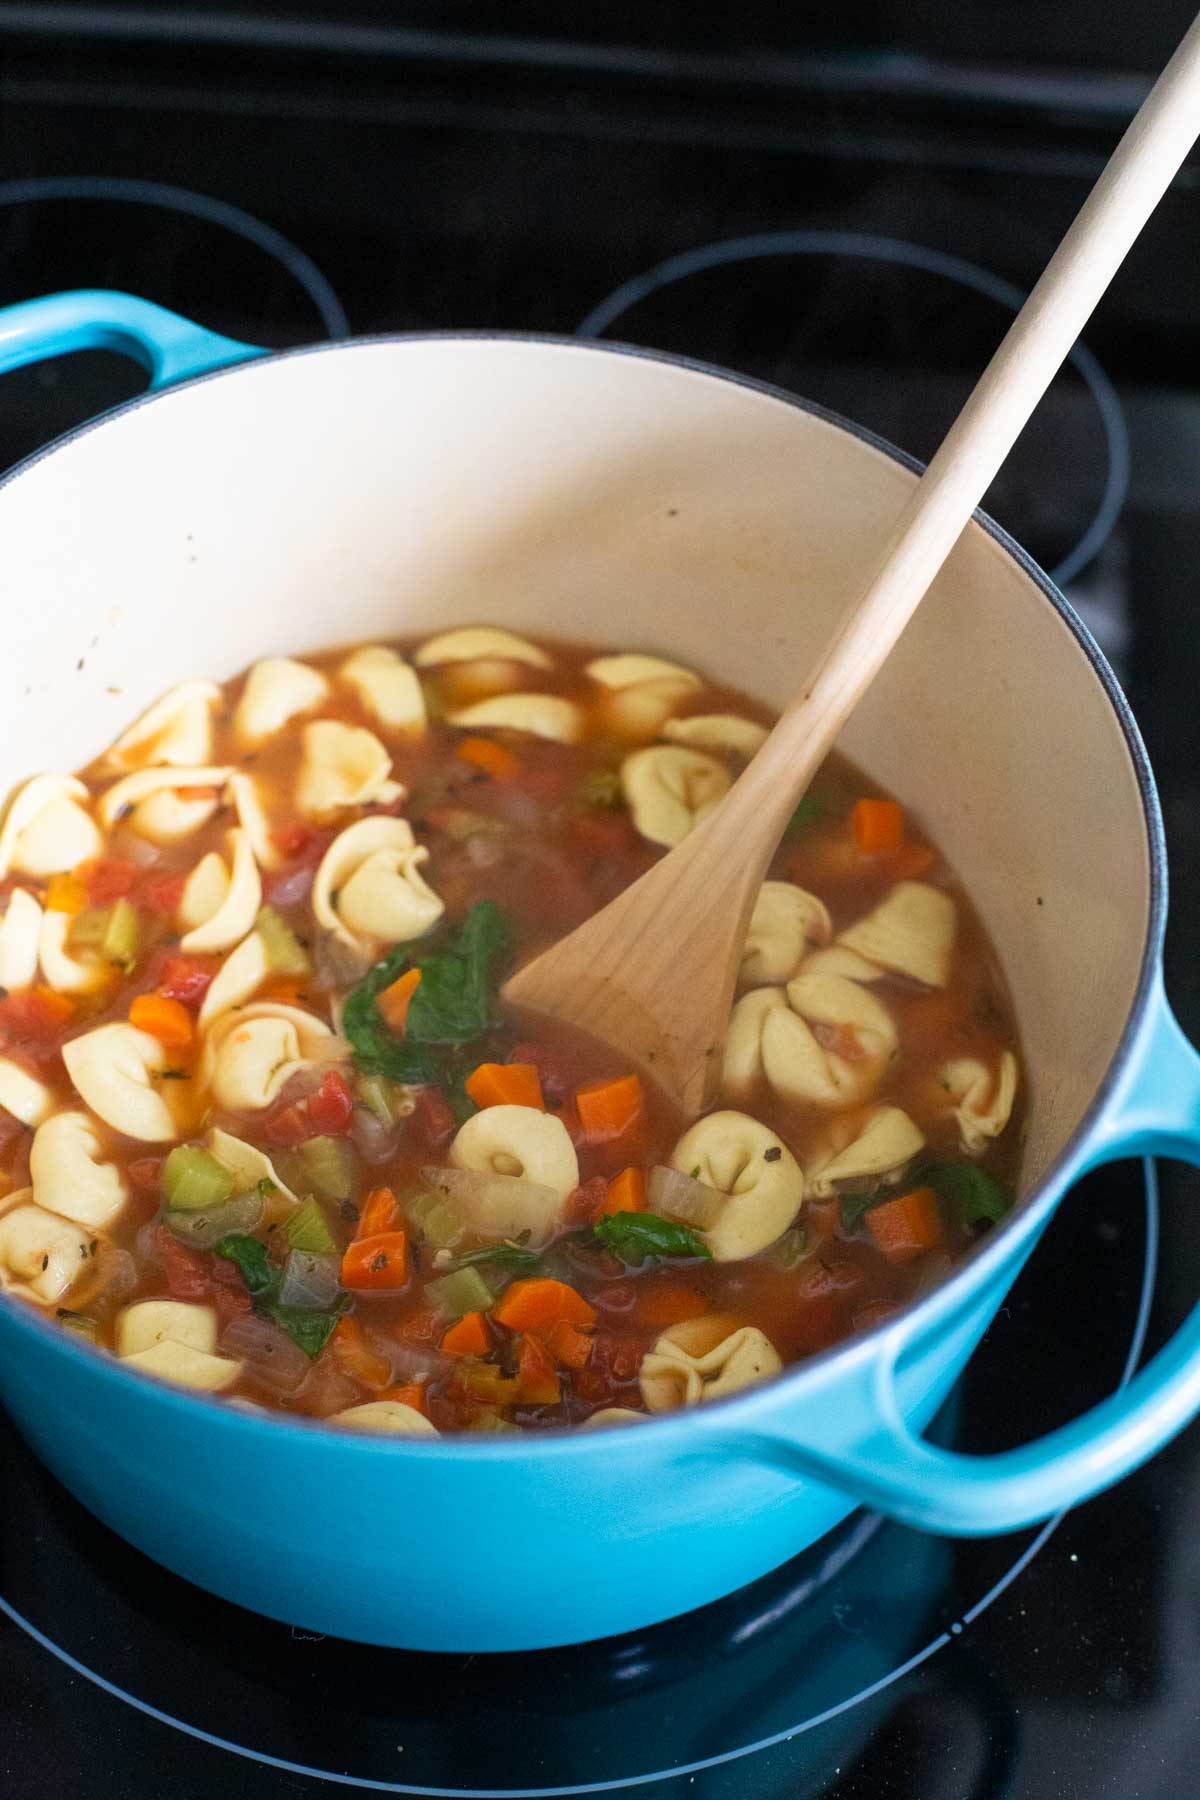 The tortellini soup is simmering in a large blue pot.